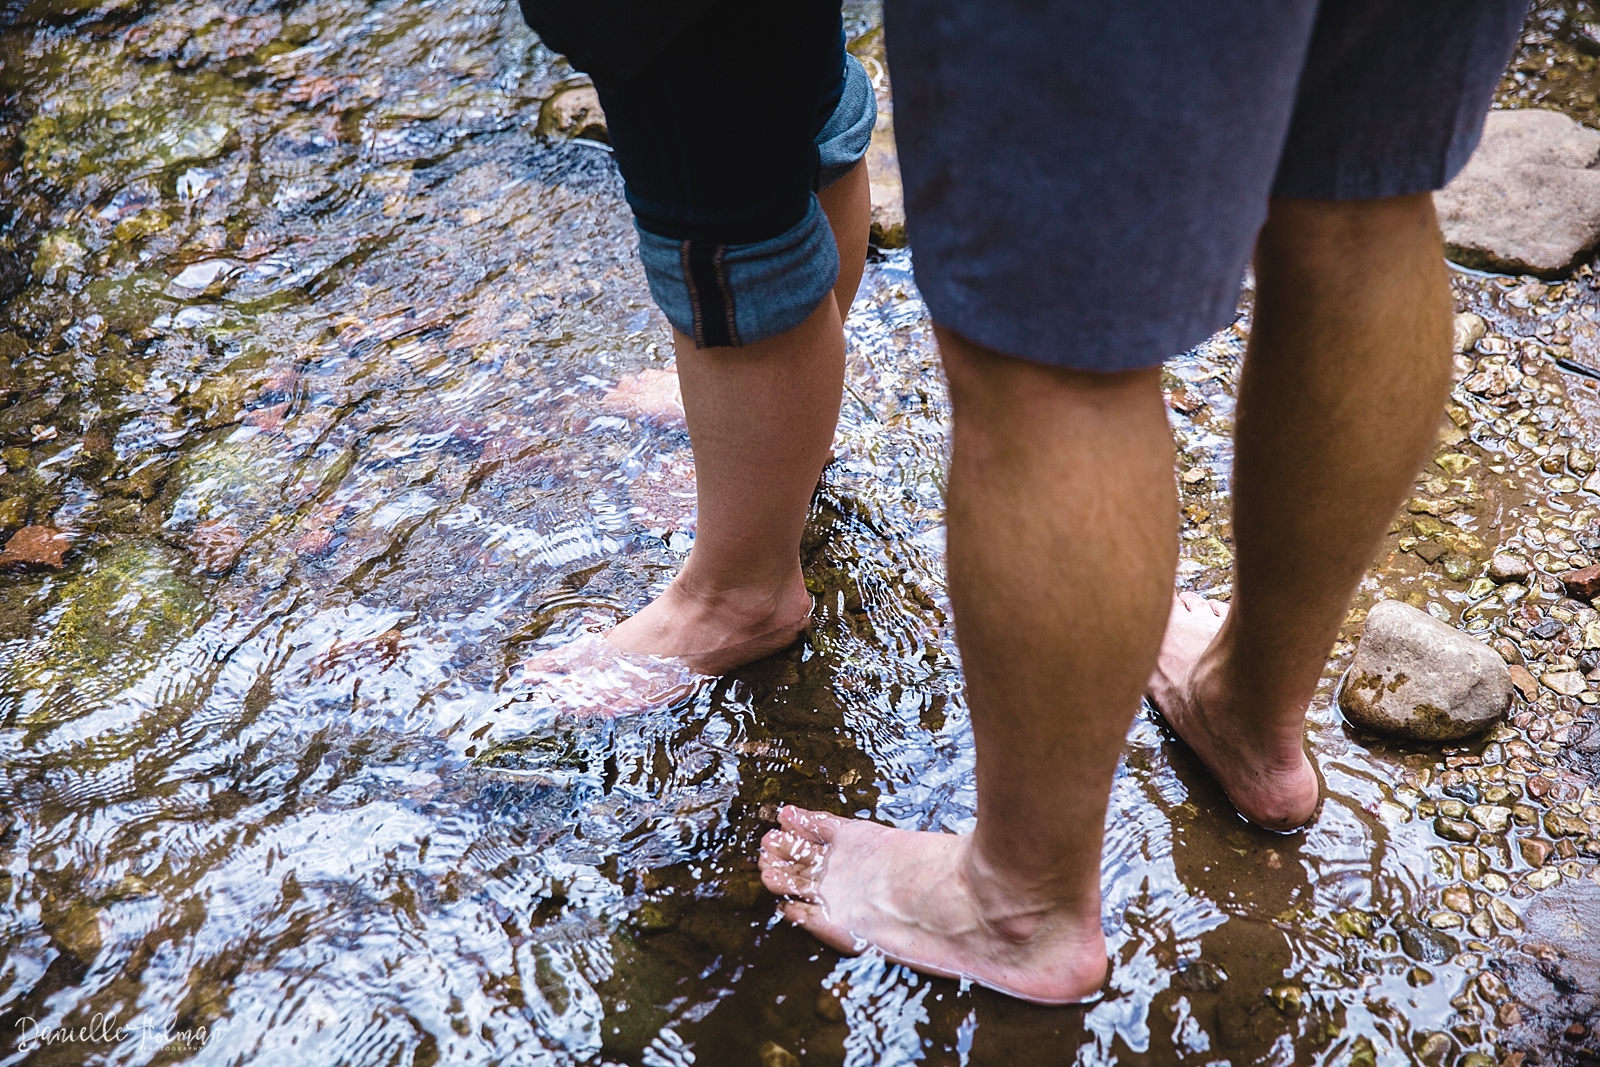 Feet in a creek, with rippling water